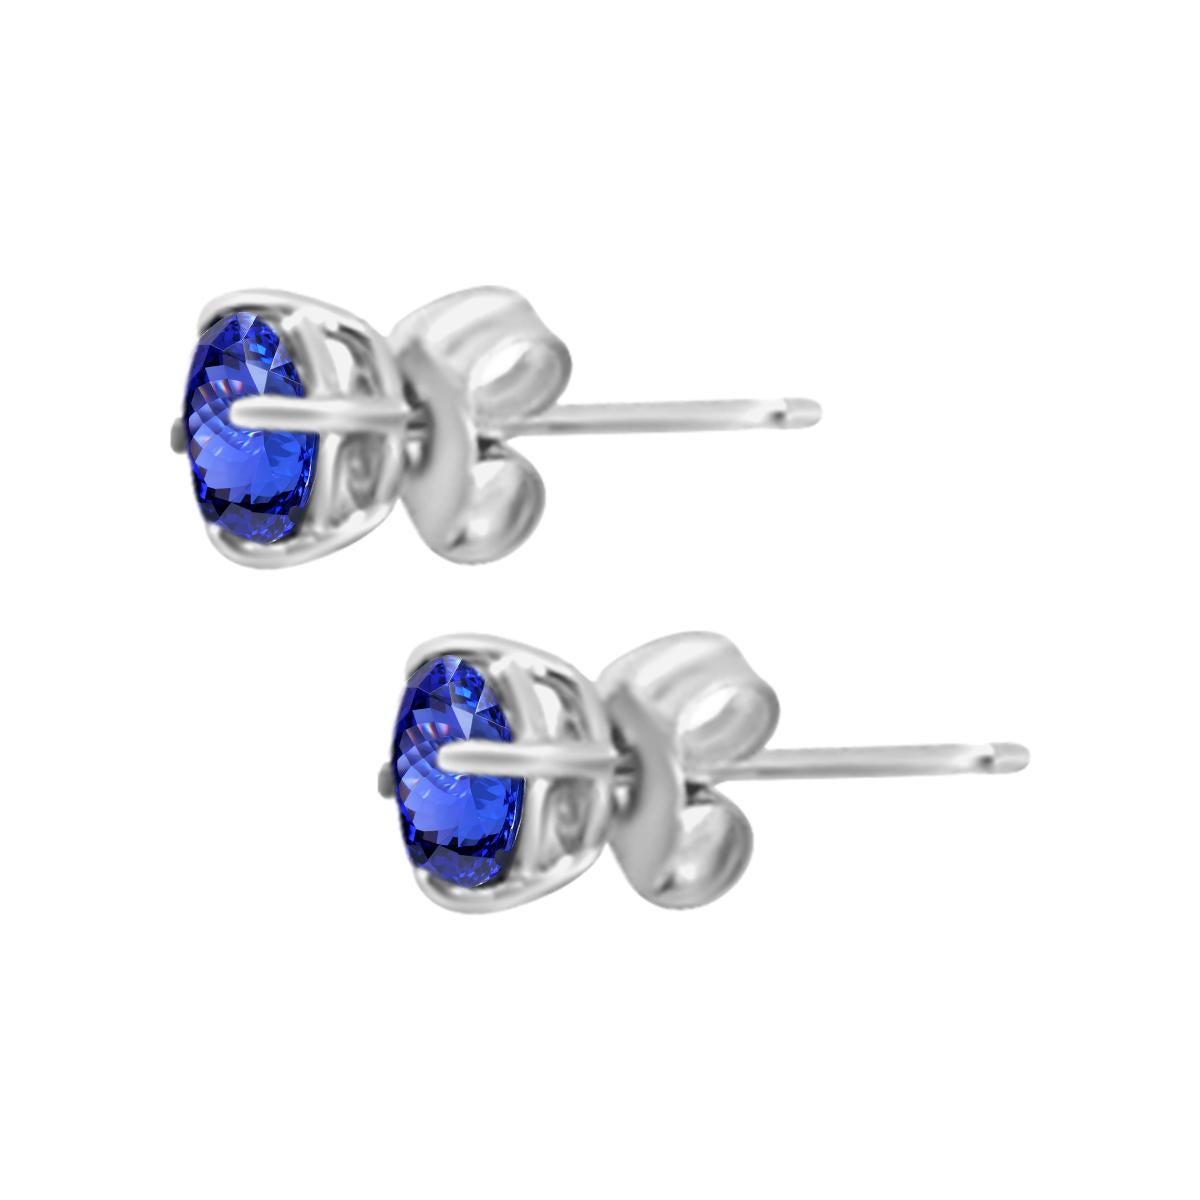 Add A Twist  To Your Tanzanite Collection With These Beautiful Studs. 
This Beautiful Pair Features Perfect Round 4.5MM Tanzanite Gemstone Perfectly Set In 14K White Gold.
So Finish Your Look With These Lovely Pair Of Tanzanite Stud Earrings From